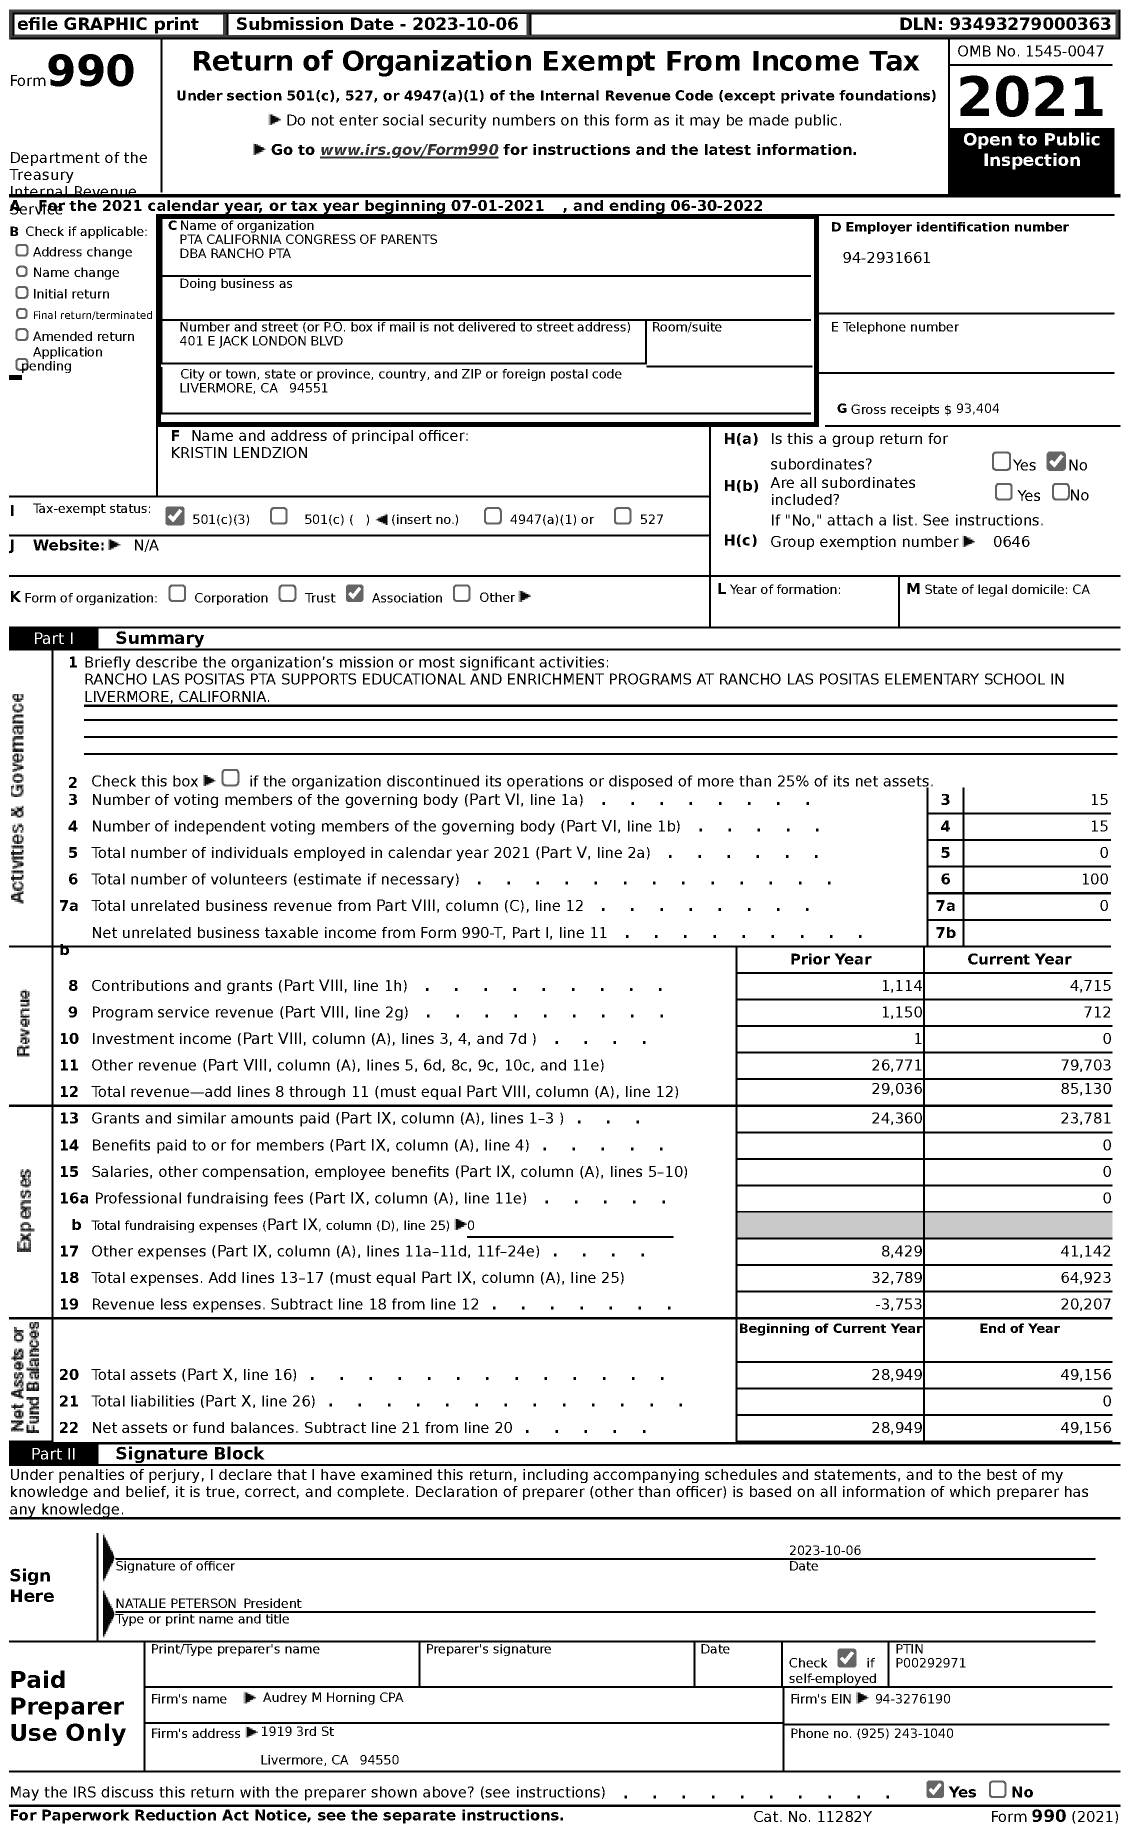 Image of first page of 2021 Form 990 for California State PTA - 3343 Rancho Las Positas Elementary